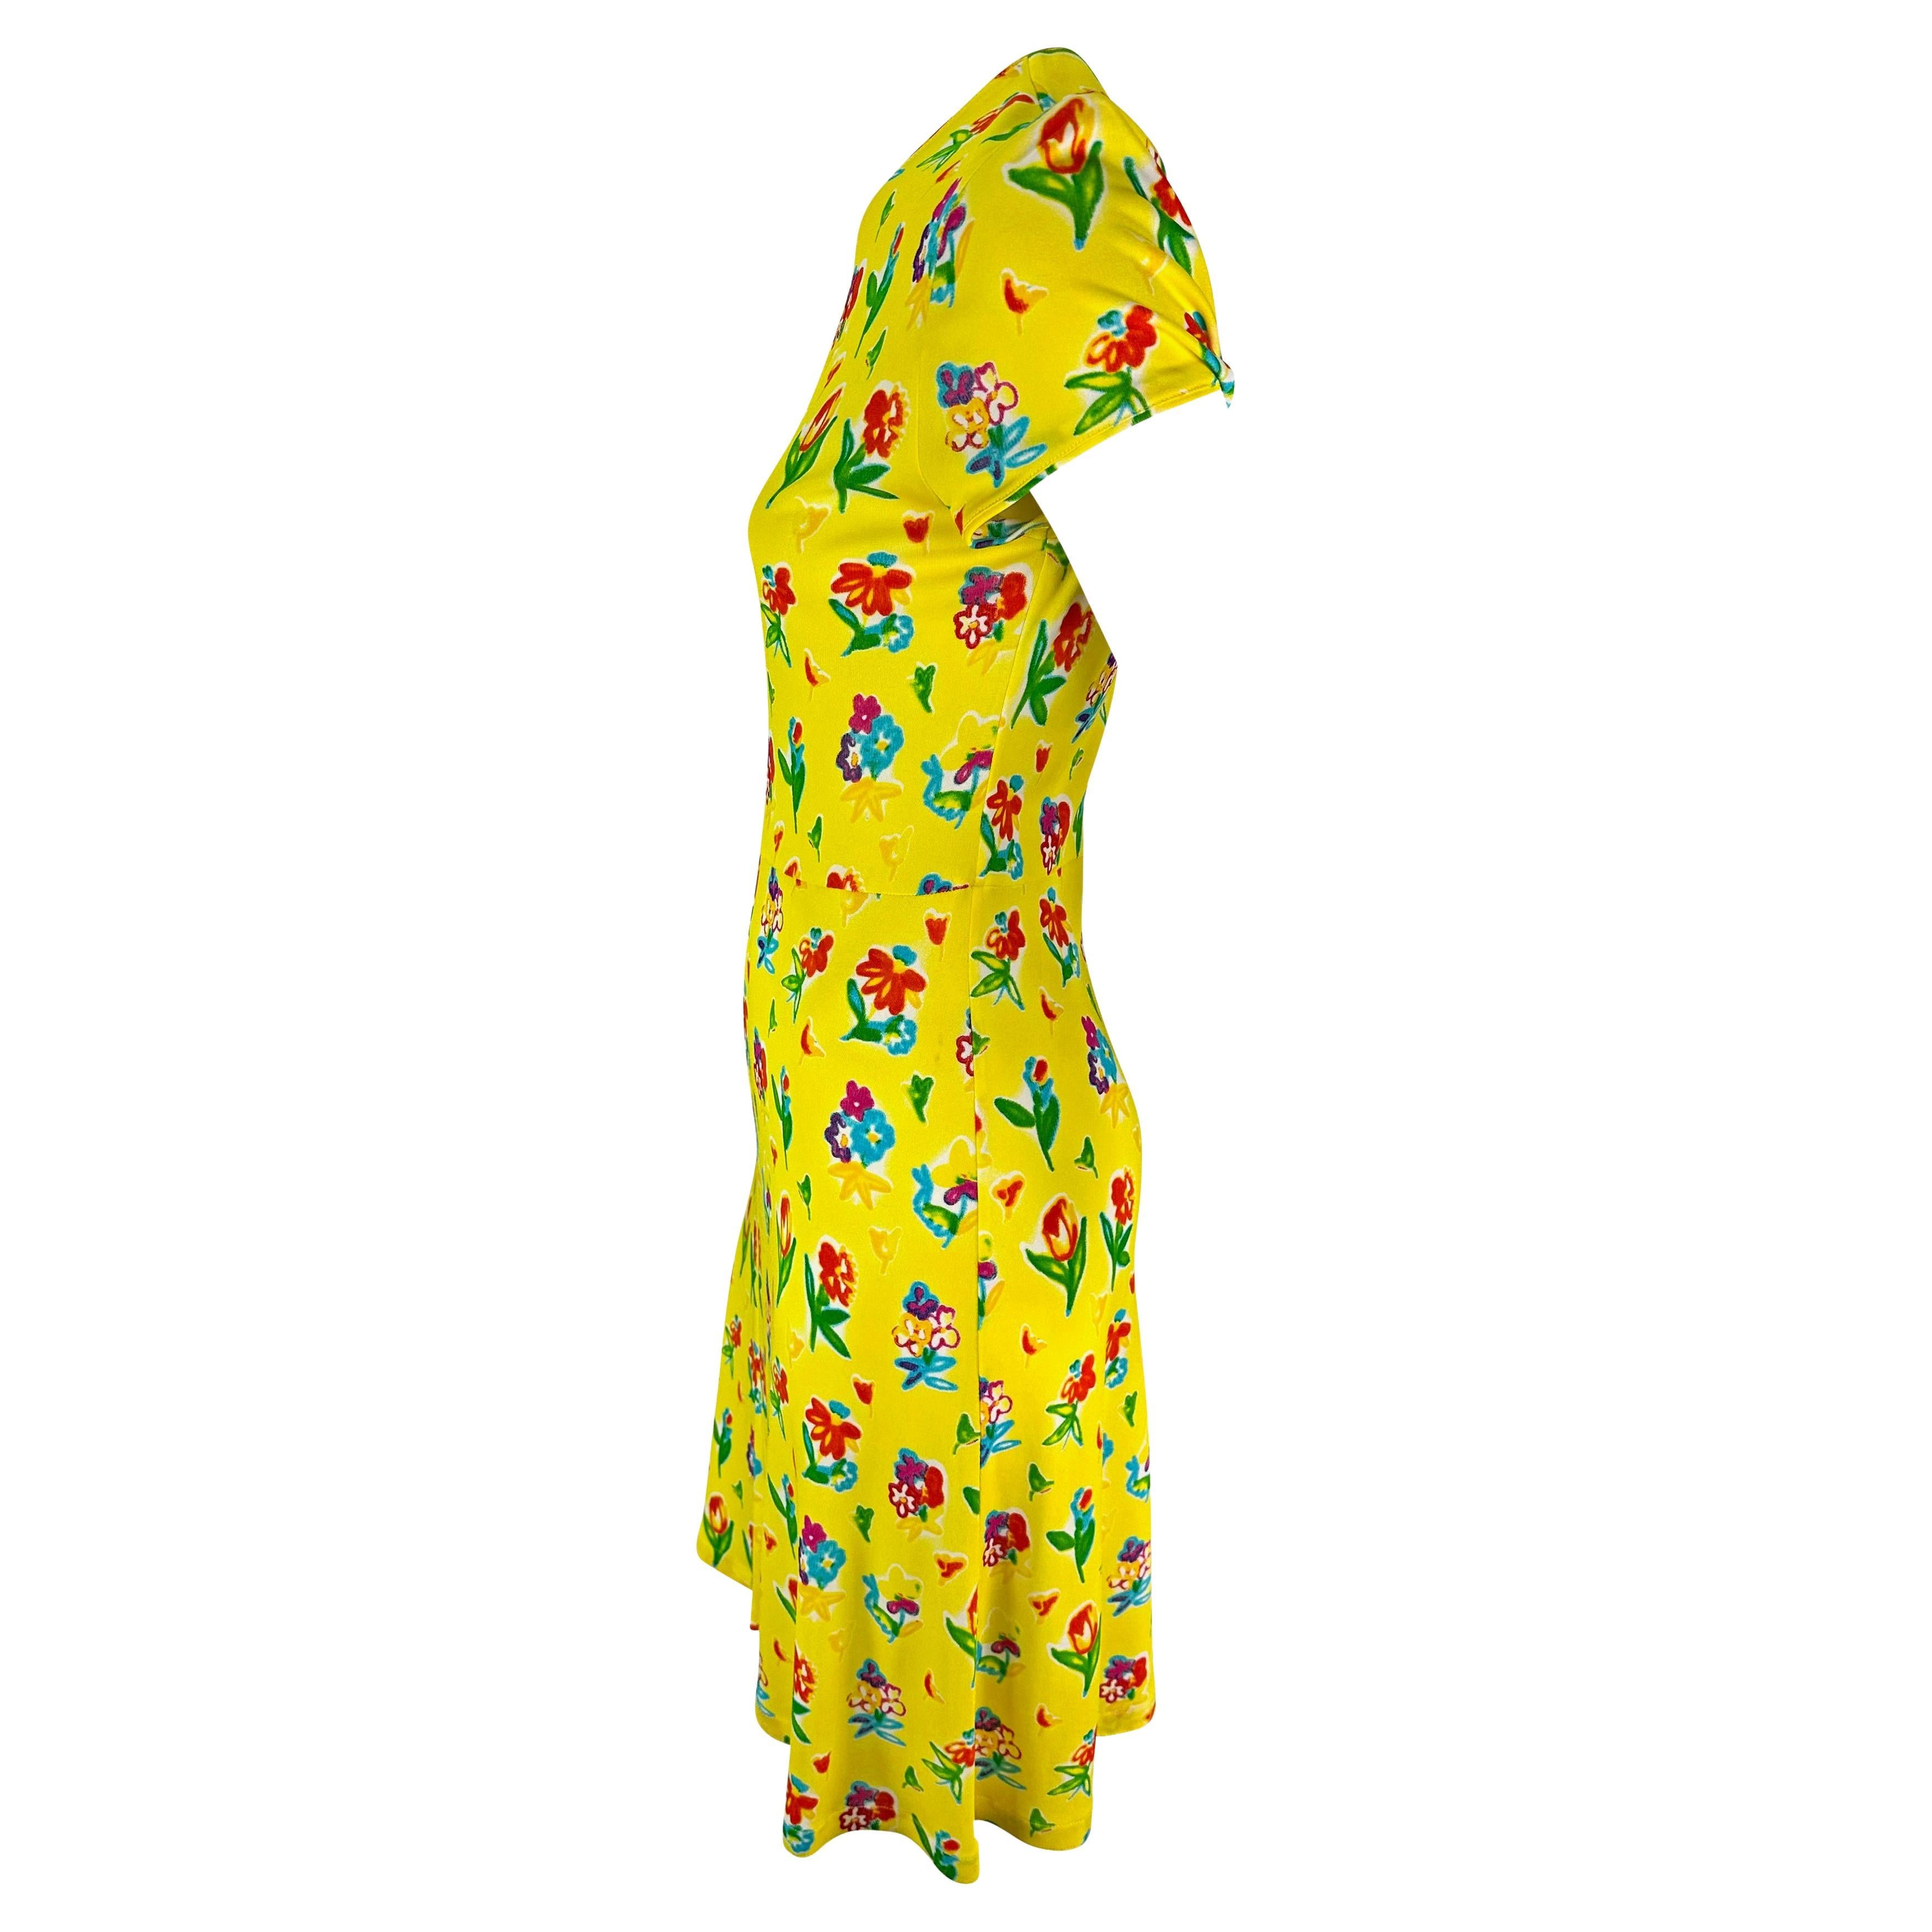 Women's S/S 1996 Gianni Versace Yellow Floral Short Sleeve Viscose Midi Dress For Sale